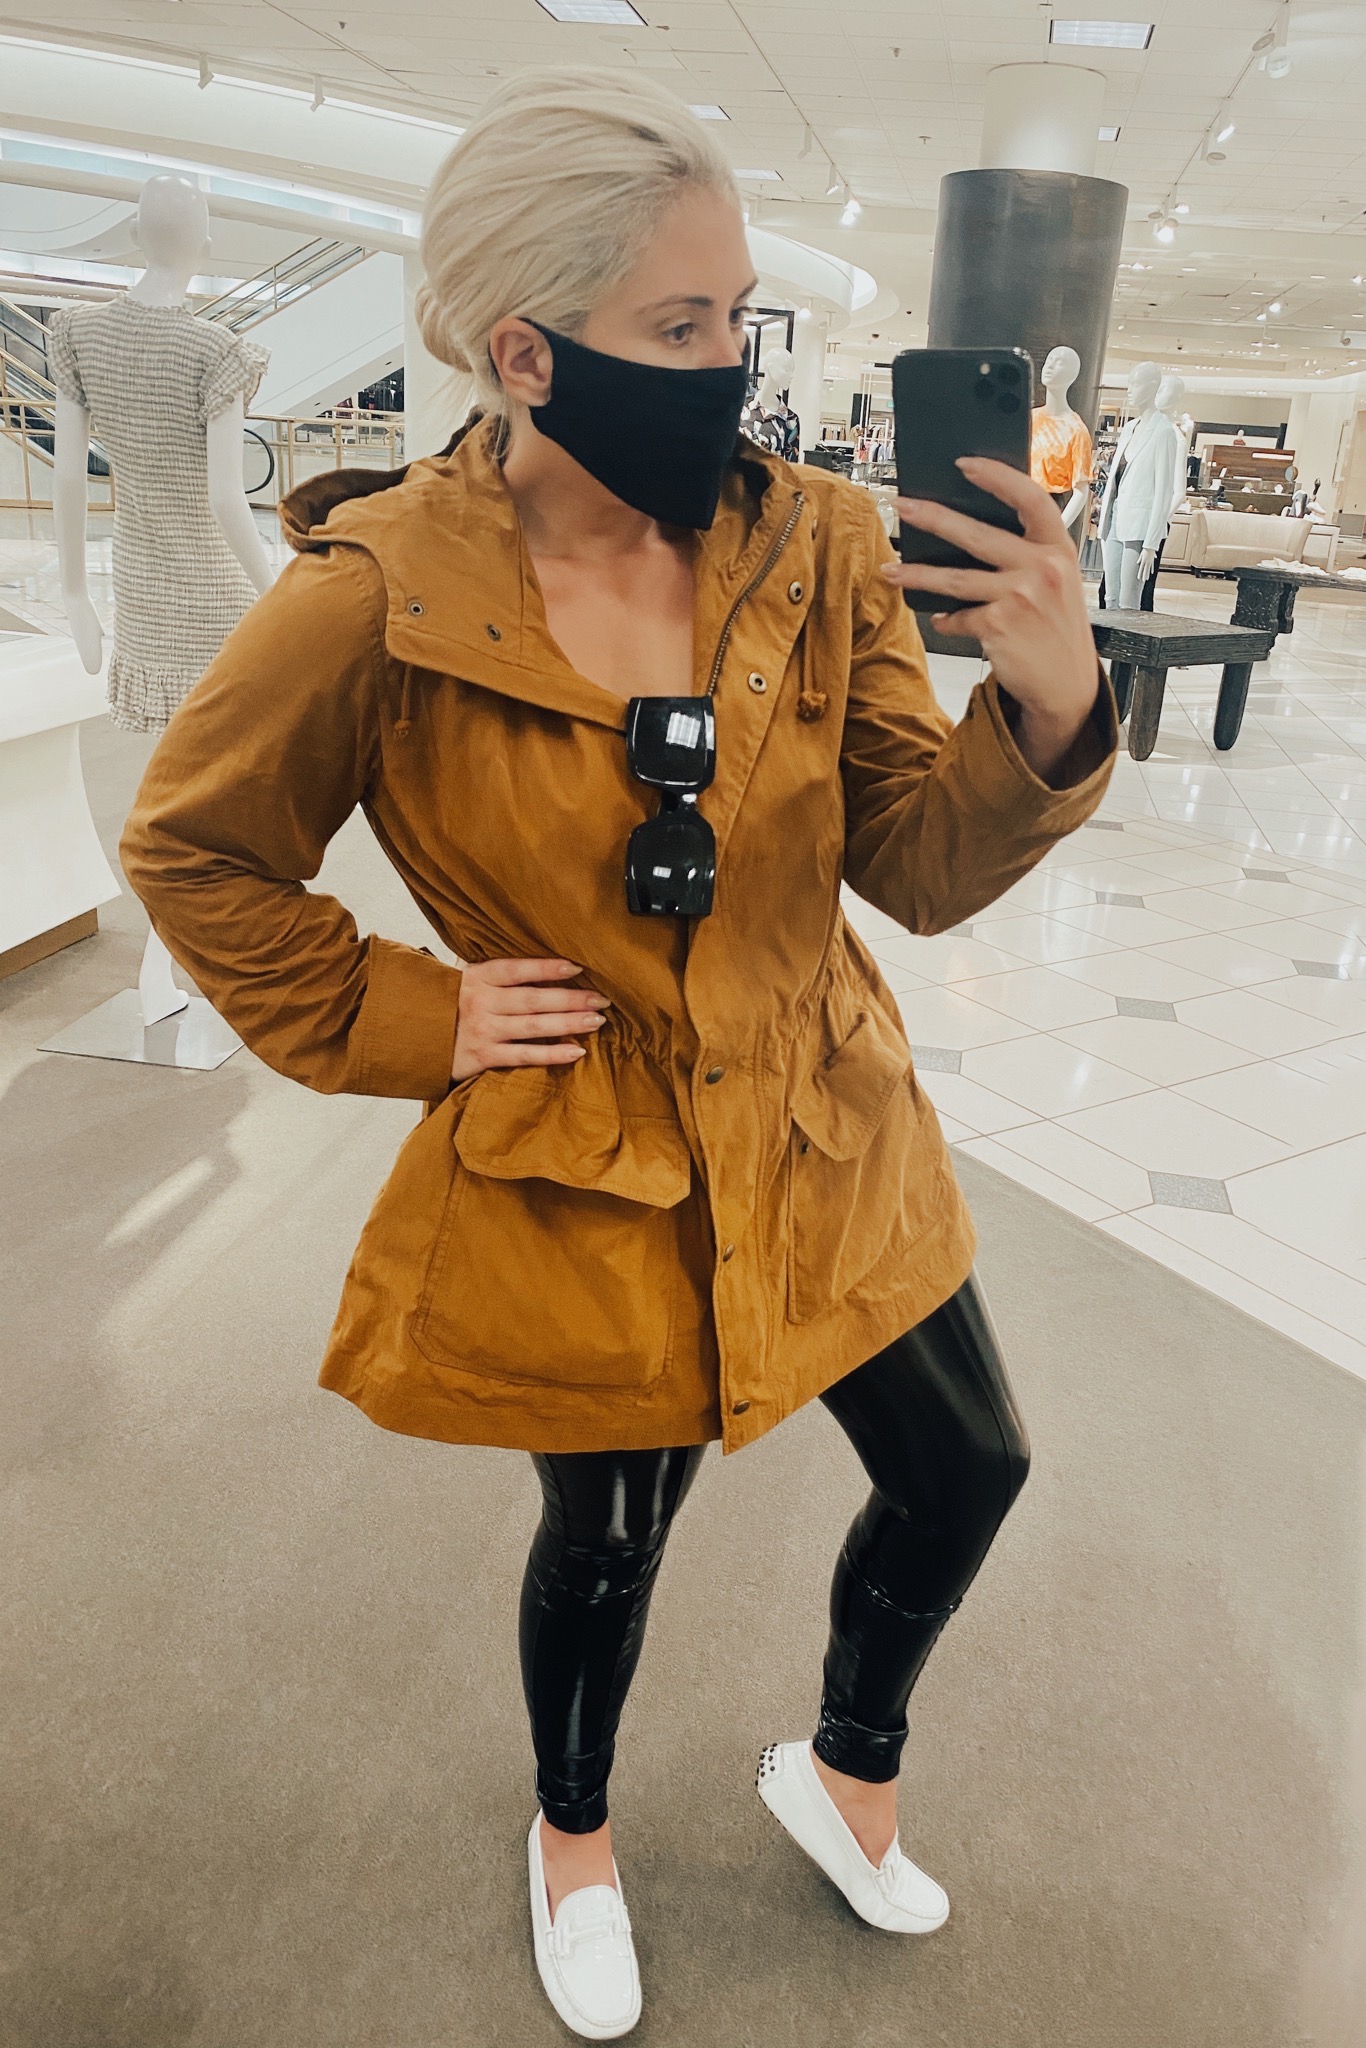 Madewell Jacket, Katwalksf, Spanx Review, Kat Ensign,Spanx Faux Patent Leather Leggings